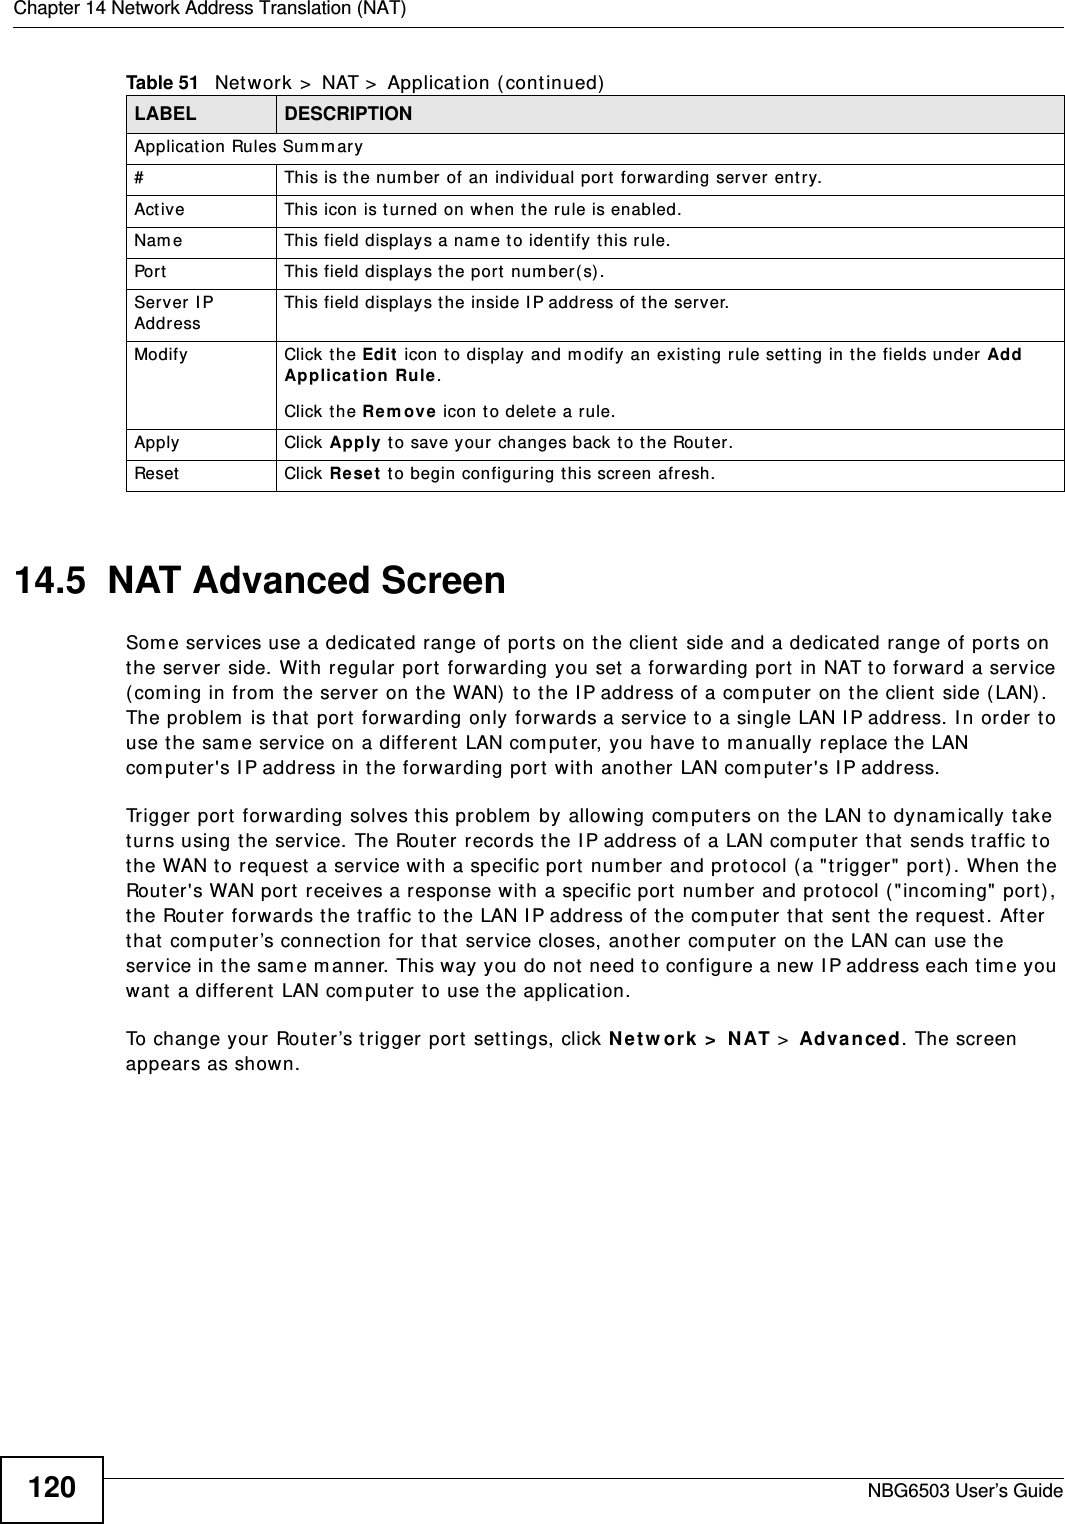 Chapter 14 Network Address Translation (NAT)NBG6503 User’s Guide12014.5  NAT Advanced ScreenSome services use a dedicated range of ports on the client side and a dedicated range of ports on the server side. With regular port forwarding you set a forwarding port in NAT to forward a service (coming in from the server on the WAN) to the IP address of a computer on the client side (LAN). The problem is that port forwarding only forwards a service to a single LAN IP address. In order to use the same service on a different LAN computer, you have to manually replace the LAN computer&apos;s IP address in the forwarding port with another LAN computer&apos;s IP address. Trigger port forwarding solves this problem by allowing computers on the LAN to dynamically take turns using the service. The Router records the IP address of a LAN computer that sends traffic to the WAN to request a service with a specific port number and protocol (a &quot;trigger&quot; port). When the Router&apos;s WAN port receives a response with a specific port number and protocol (&quot;incoming&quot; port), the Router forwards the traffic to the LAN IP address of the computer that sent the request. After that computer’s connection for that service closes, another computer on the LAN can use the service in the same manner. This way you do not need to configure a new IP address each time you want a different LAN computer to use the application.To change your Router’s trigger port settings, click Network &gt; NAT &gt; Advanced. The screen appears as shown.Application Rules Summary#This is the number of an individual port forwarding server entry.Active This icon is turned on when the rule is enabled. Name This field displays a name to identify this rule.Port This field displays the port number(s). Server IP Address This field displays the inside IP address of the server.Modify Click the Edit icon to display and modify an existing rule setting in the fields under Add Application Rule. Click the Remove icon to delete a rule.Apply Click Apply to save your changes back to the Router.Reset Click Reset to begin configuring this screen afresh.Table 51   Network &gt; NAT &gt; Application (continued)LABEL DESCRIPTION